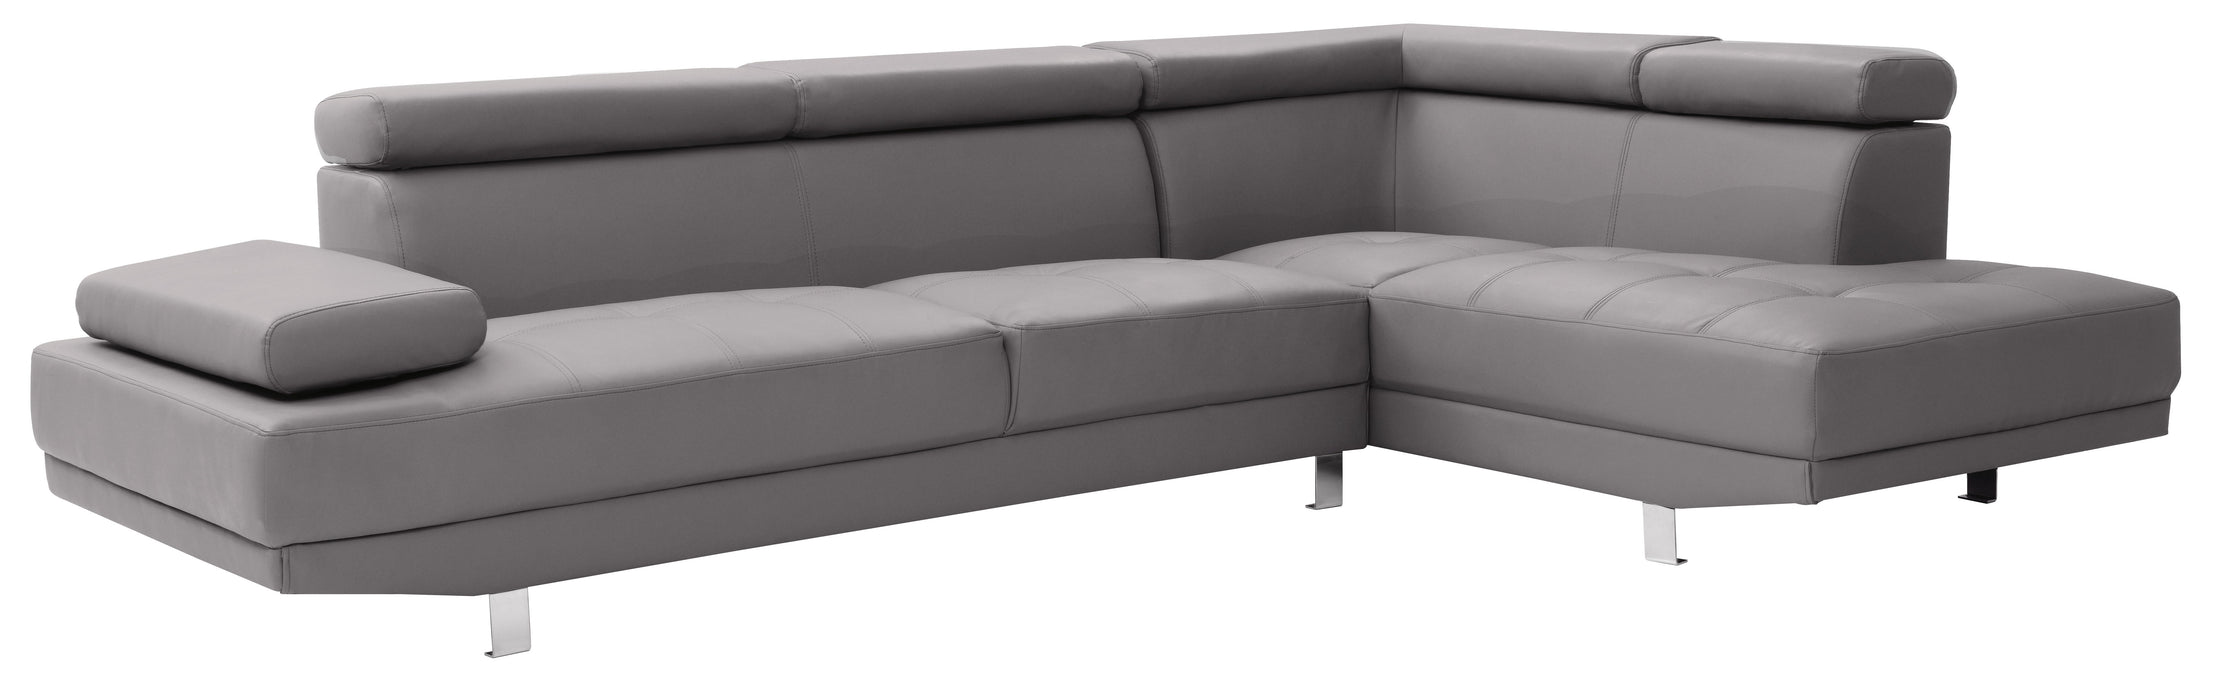 Riveredge - G452-SC Sectional (2 Boxes) - Gray